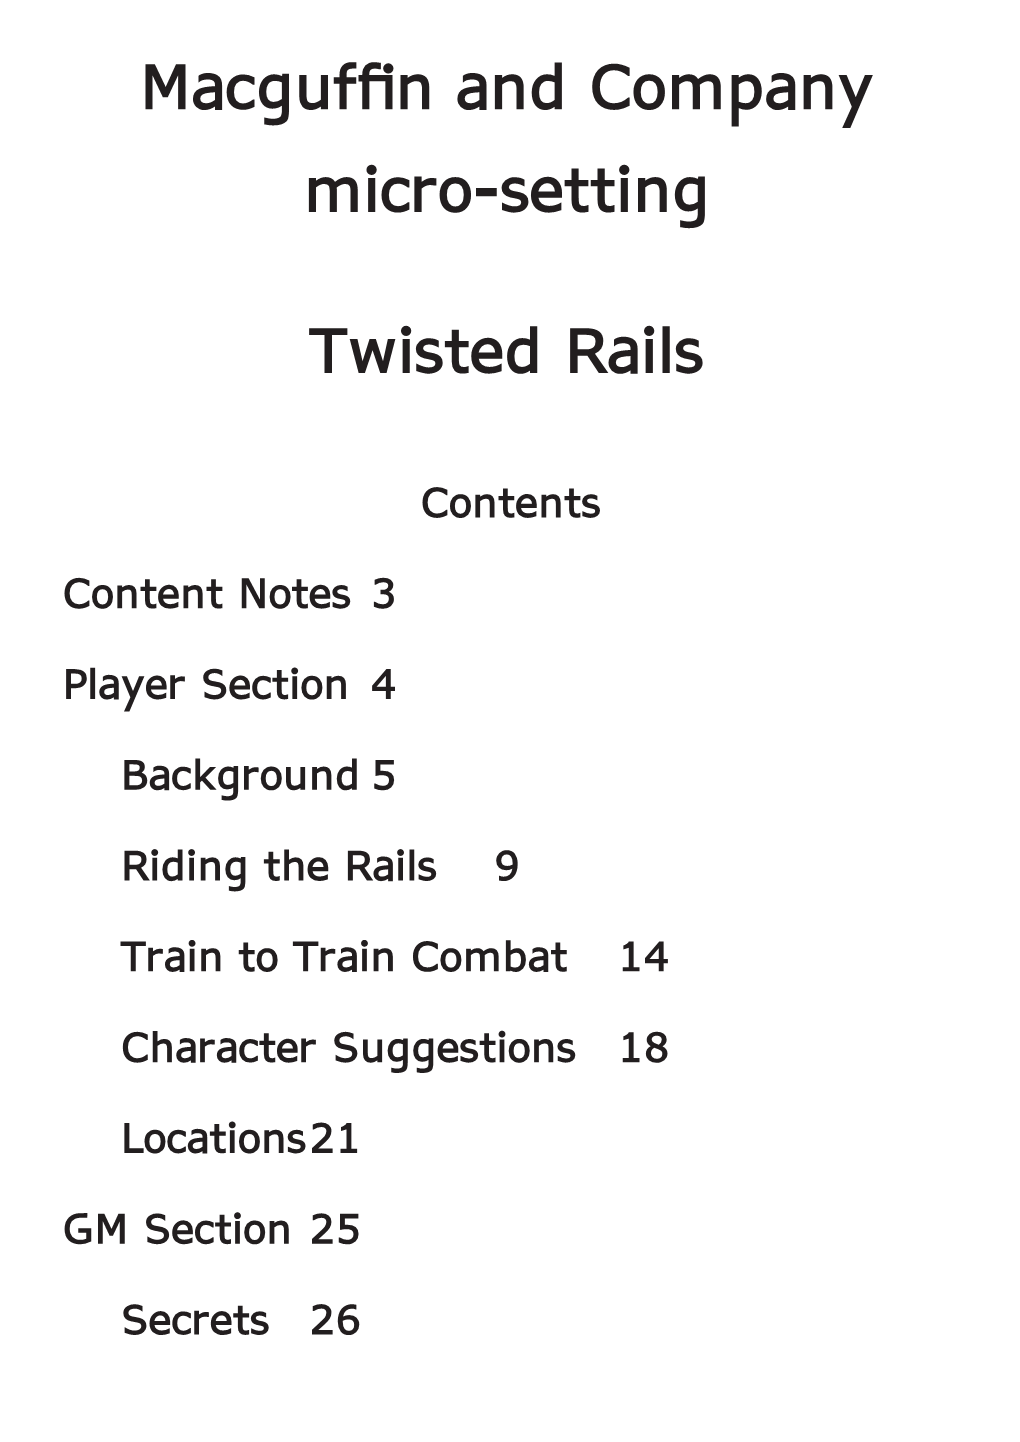 Download Twisted Rails Accessible